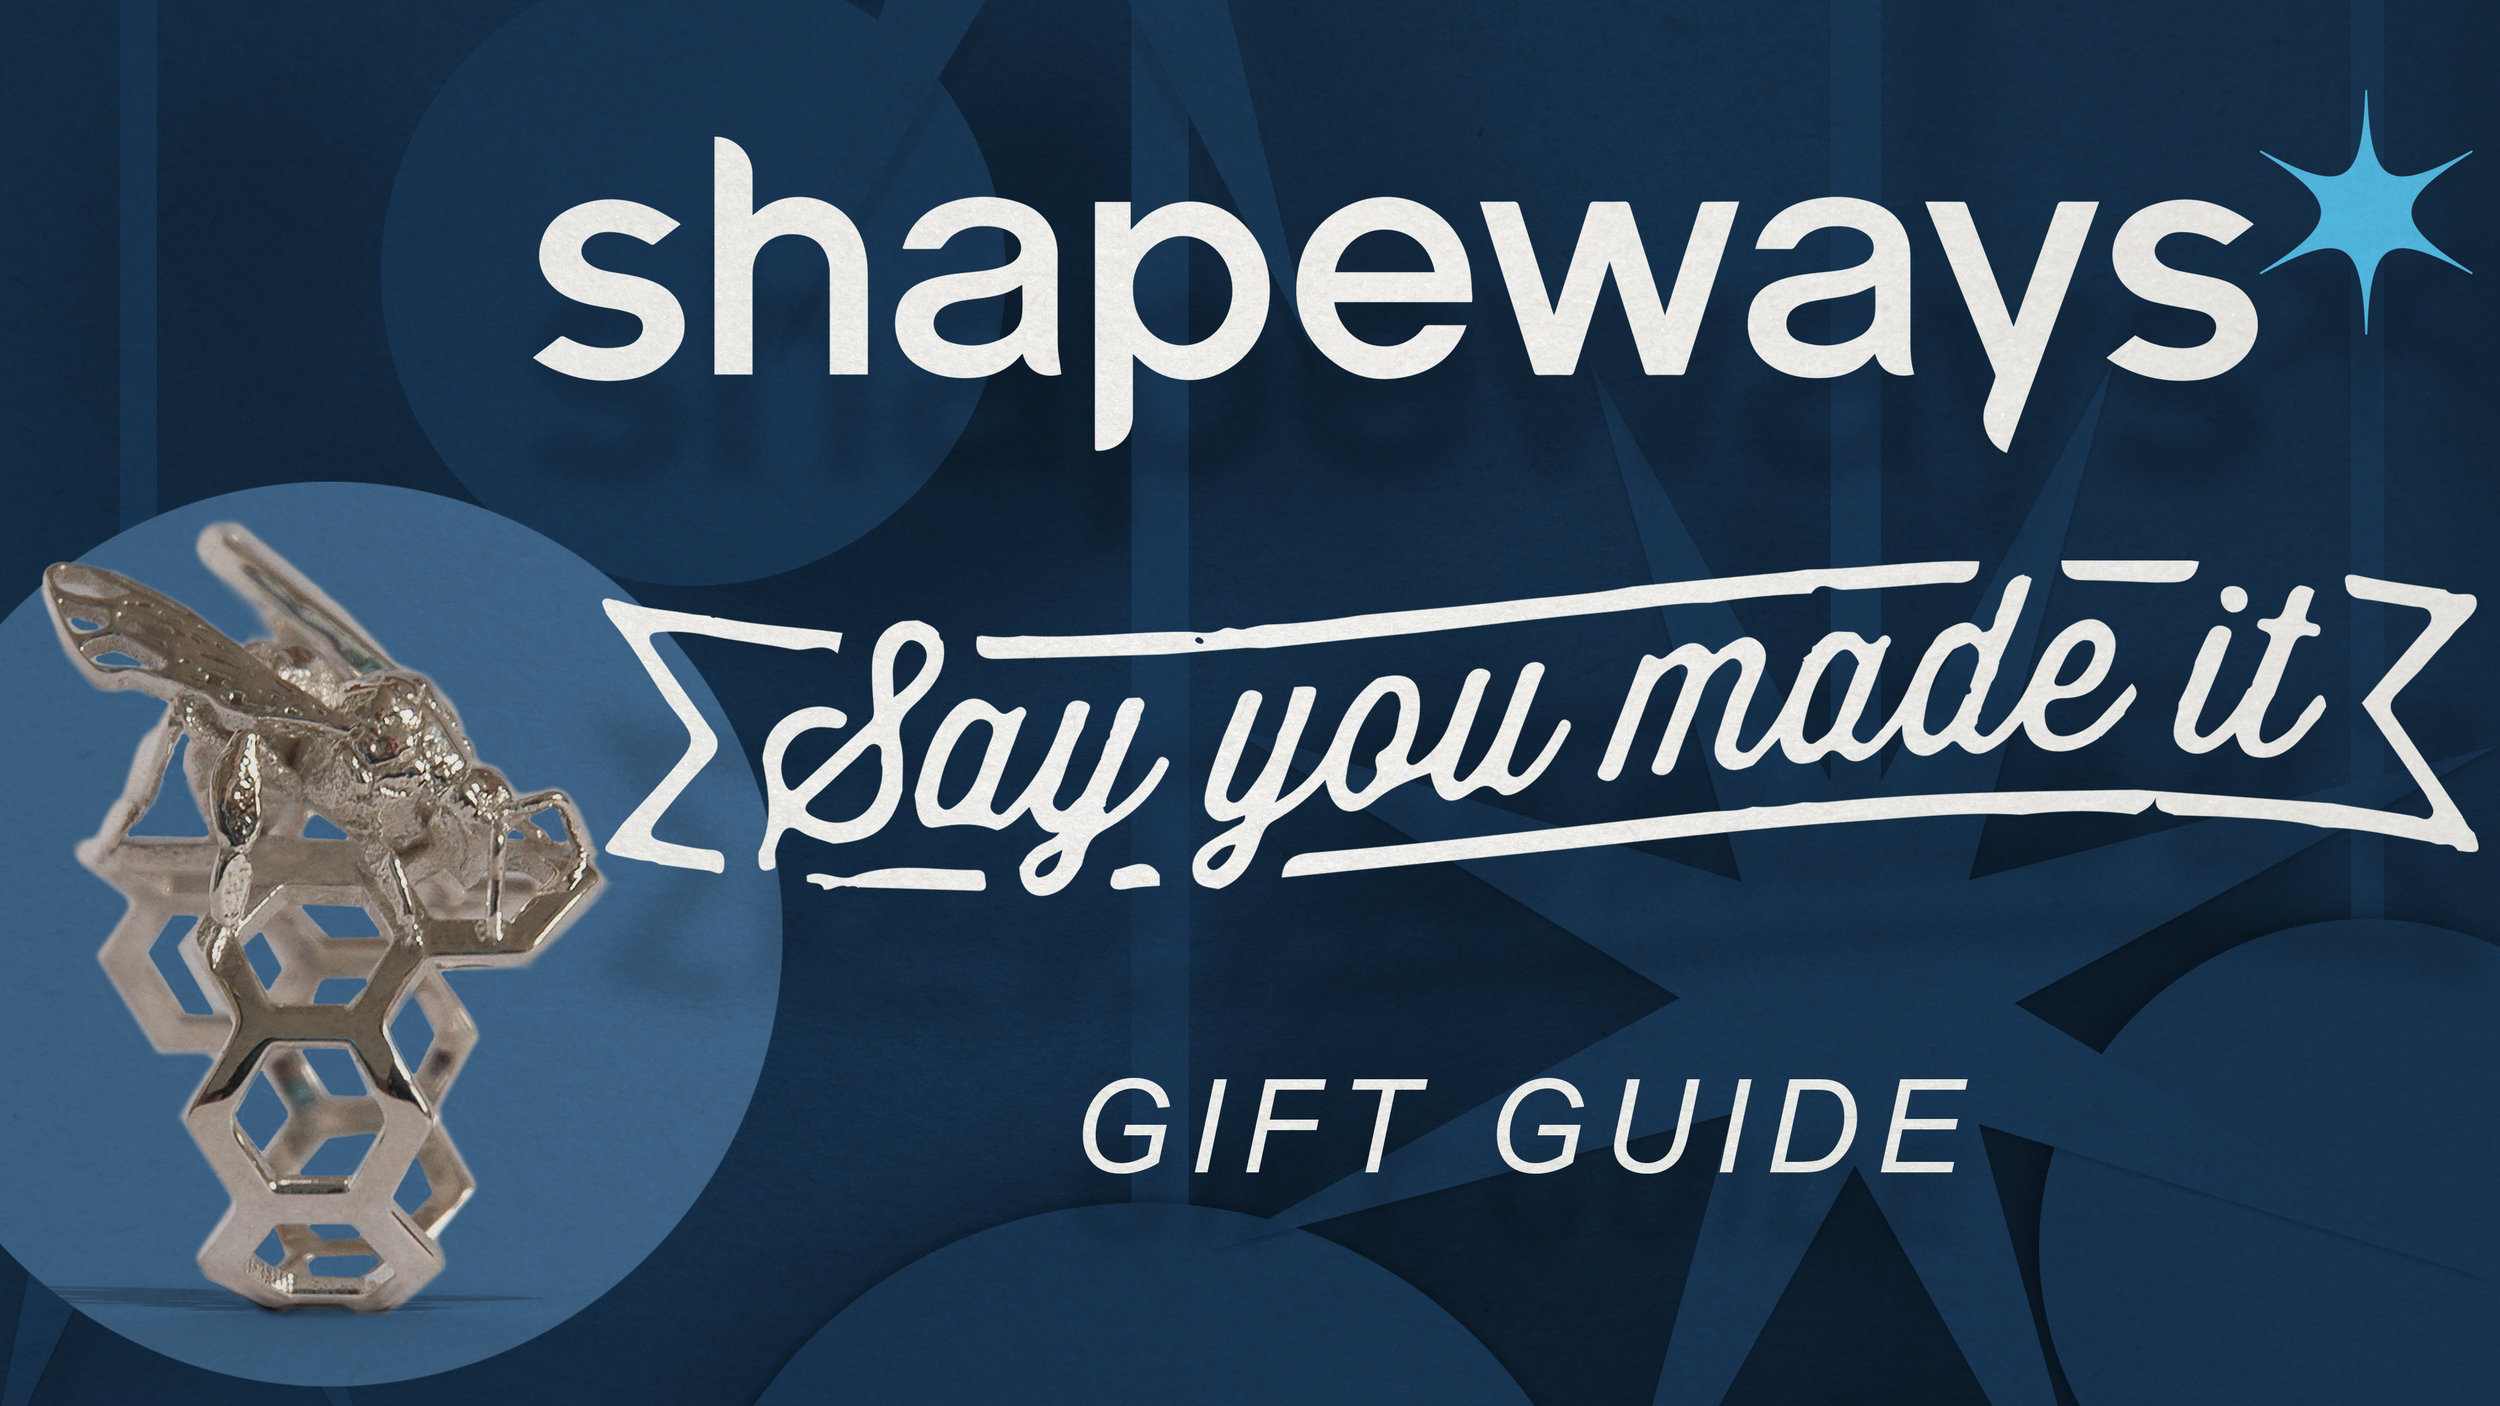 FEATURED IN THE SHAPEWAYS 2016 HOLIDAY GIFT GUIDE